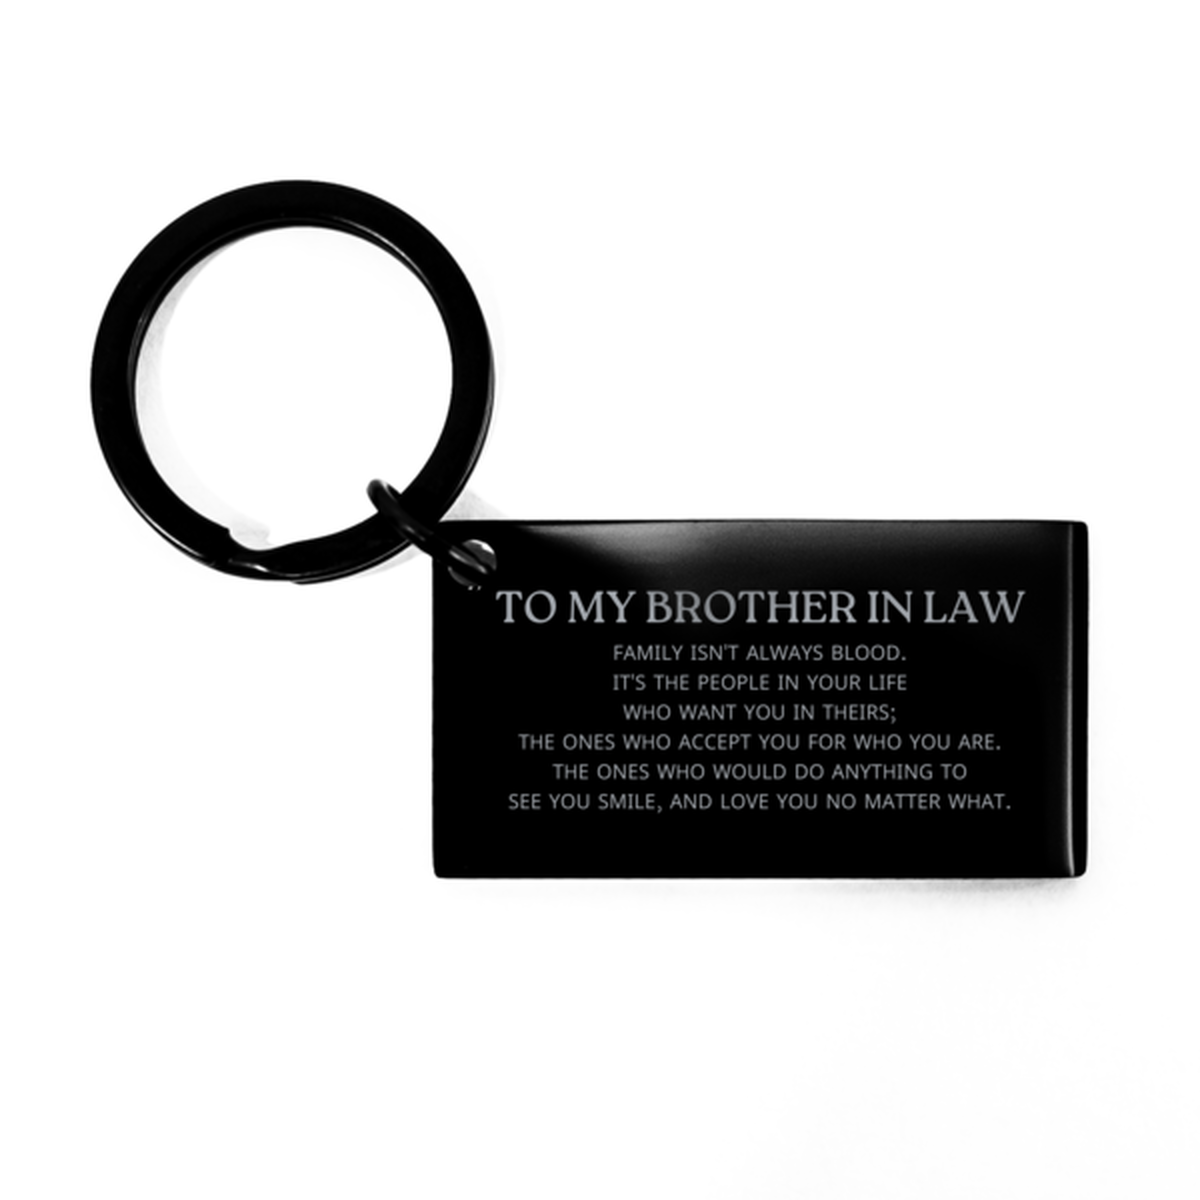 To My Brother In Law Gifts, Family isn't always blood, Brother In Law Keychain, Birthday Christmas Unique Present For Brother In Law